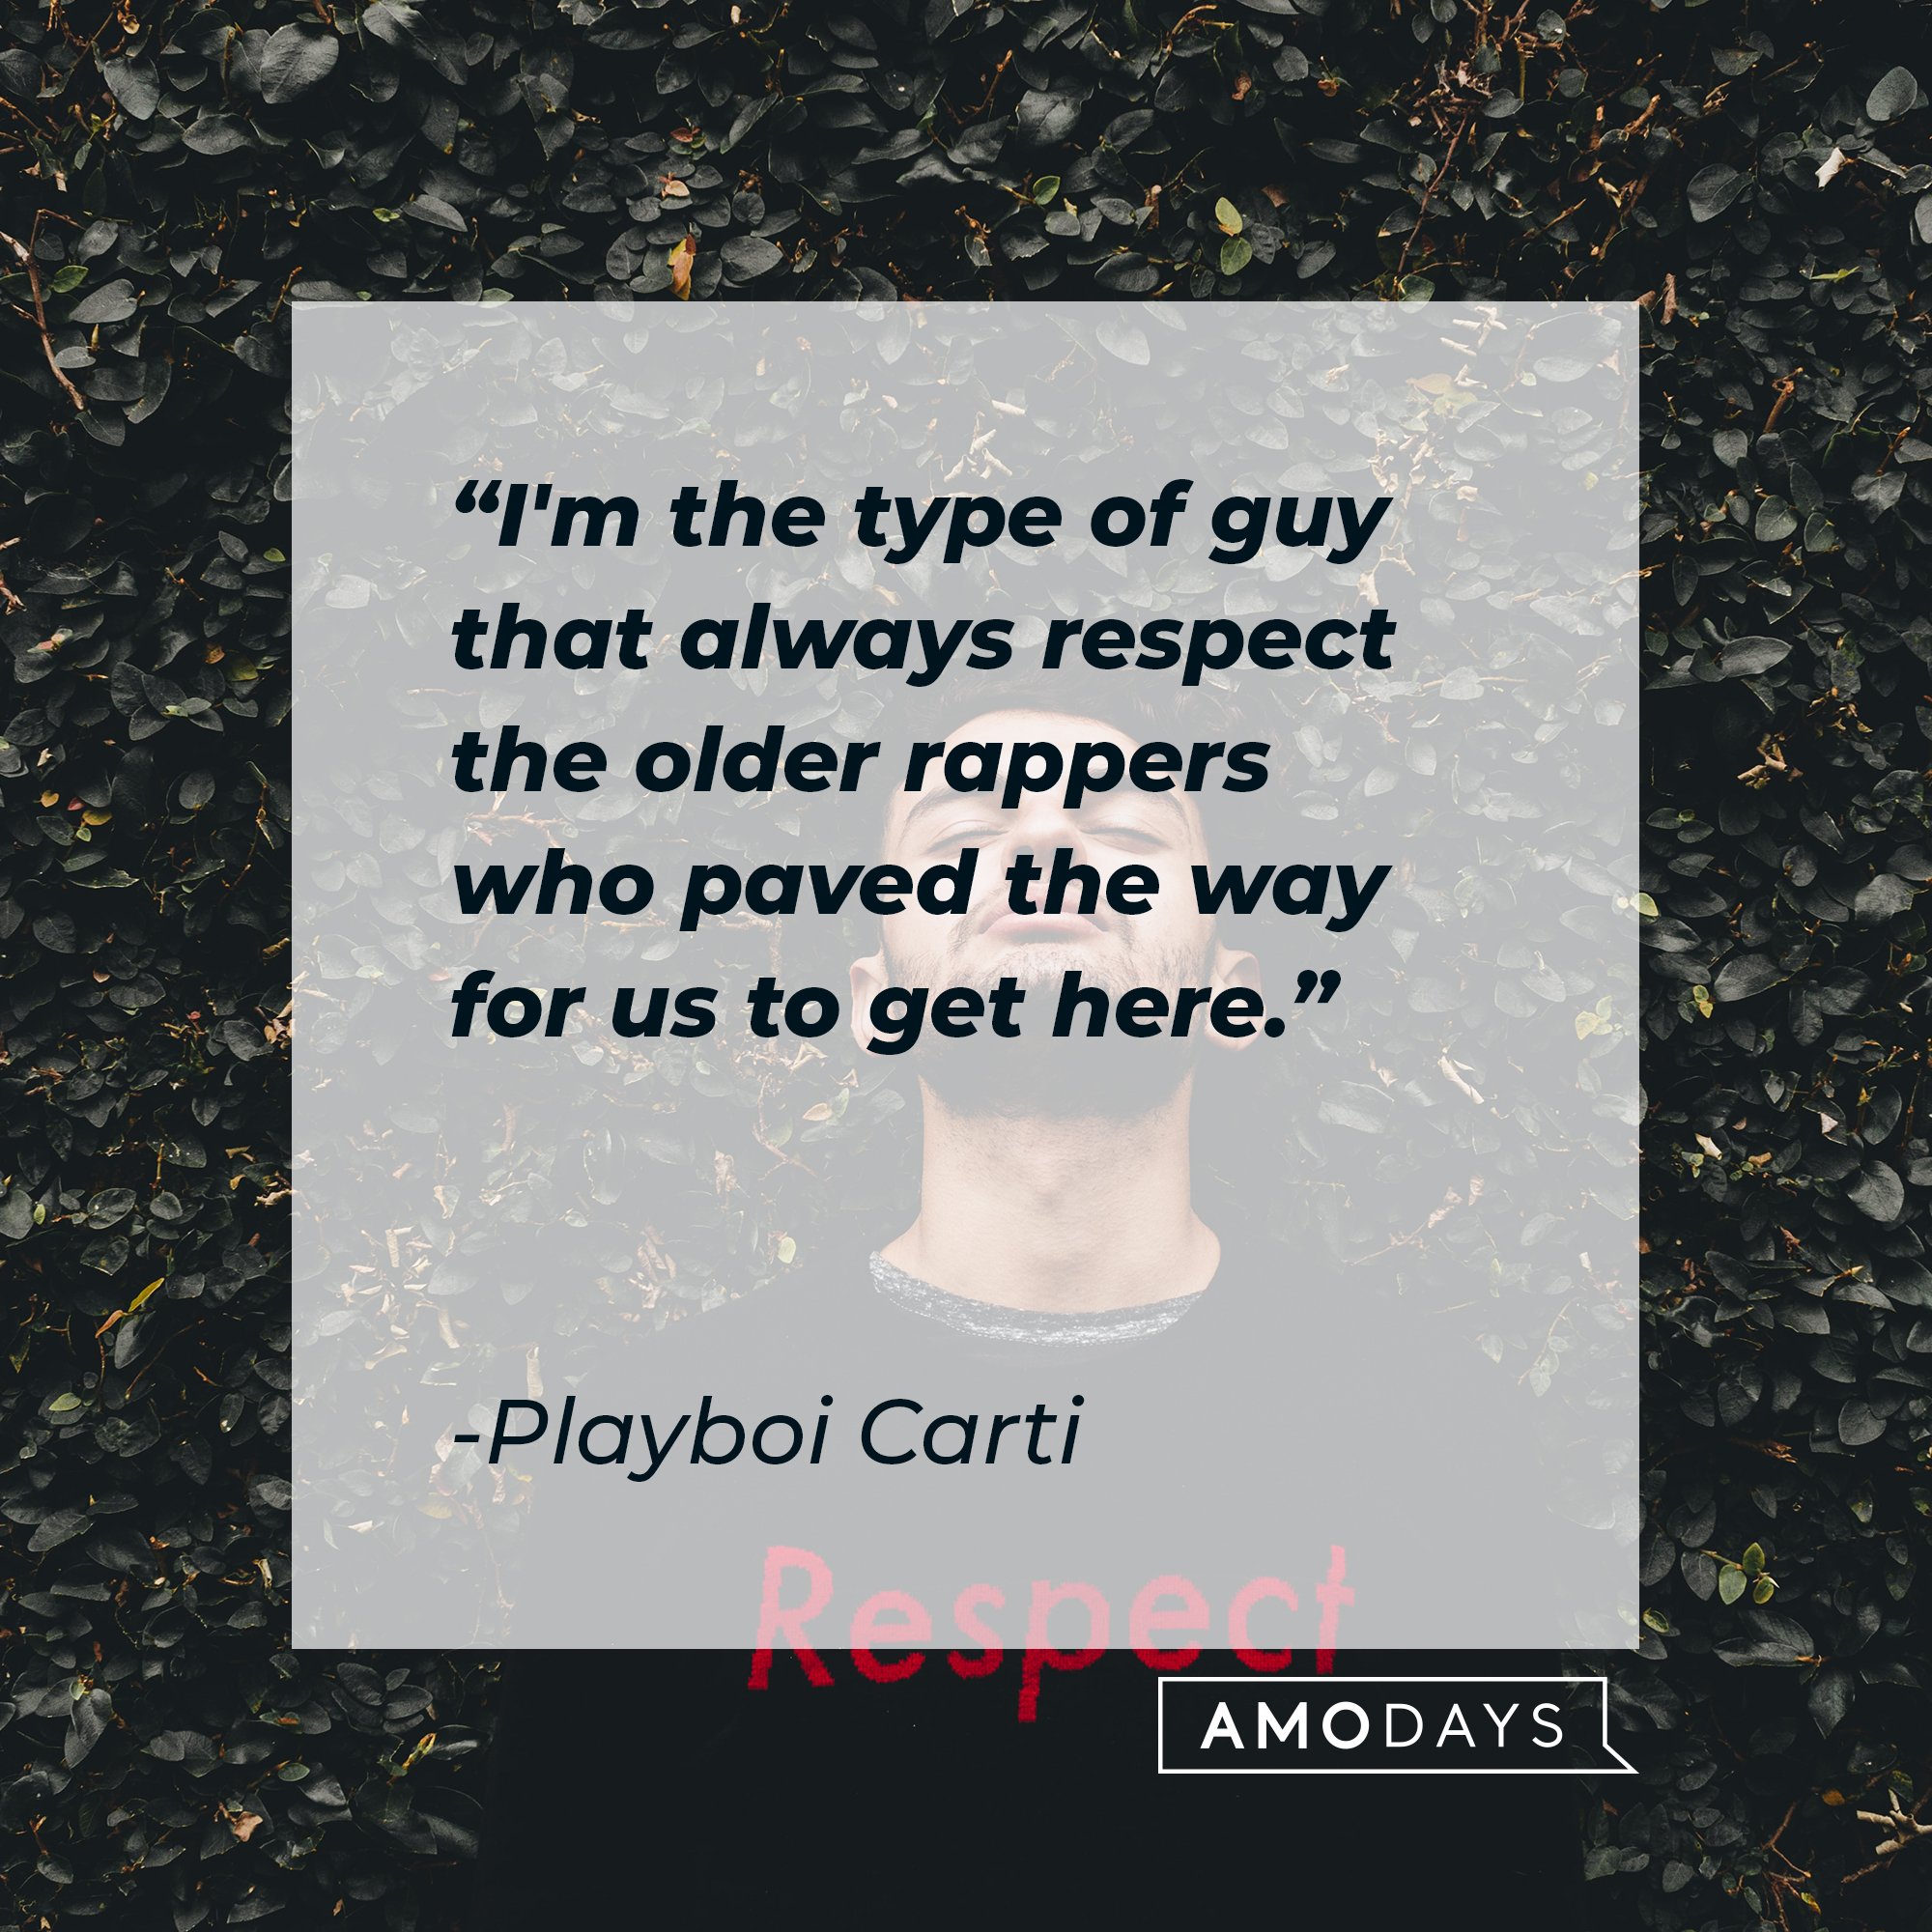 Playboi Carti ‘s quote: "I'm the type of guy that always respect the older rappers who paved the way for us to get here." | Image: AmoDays